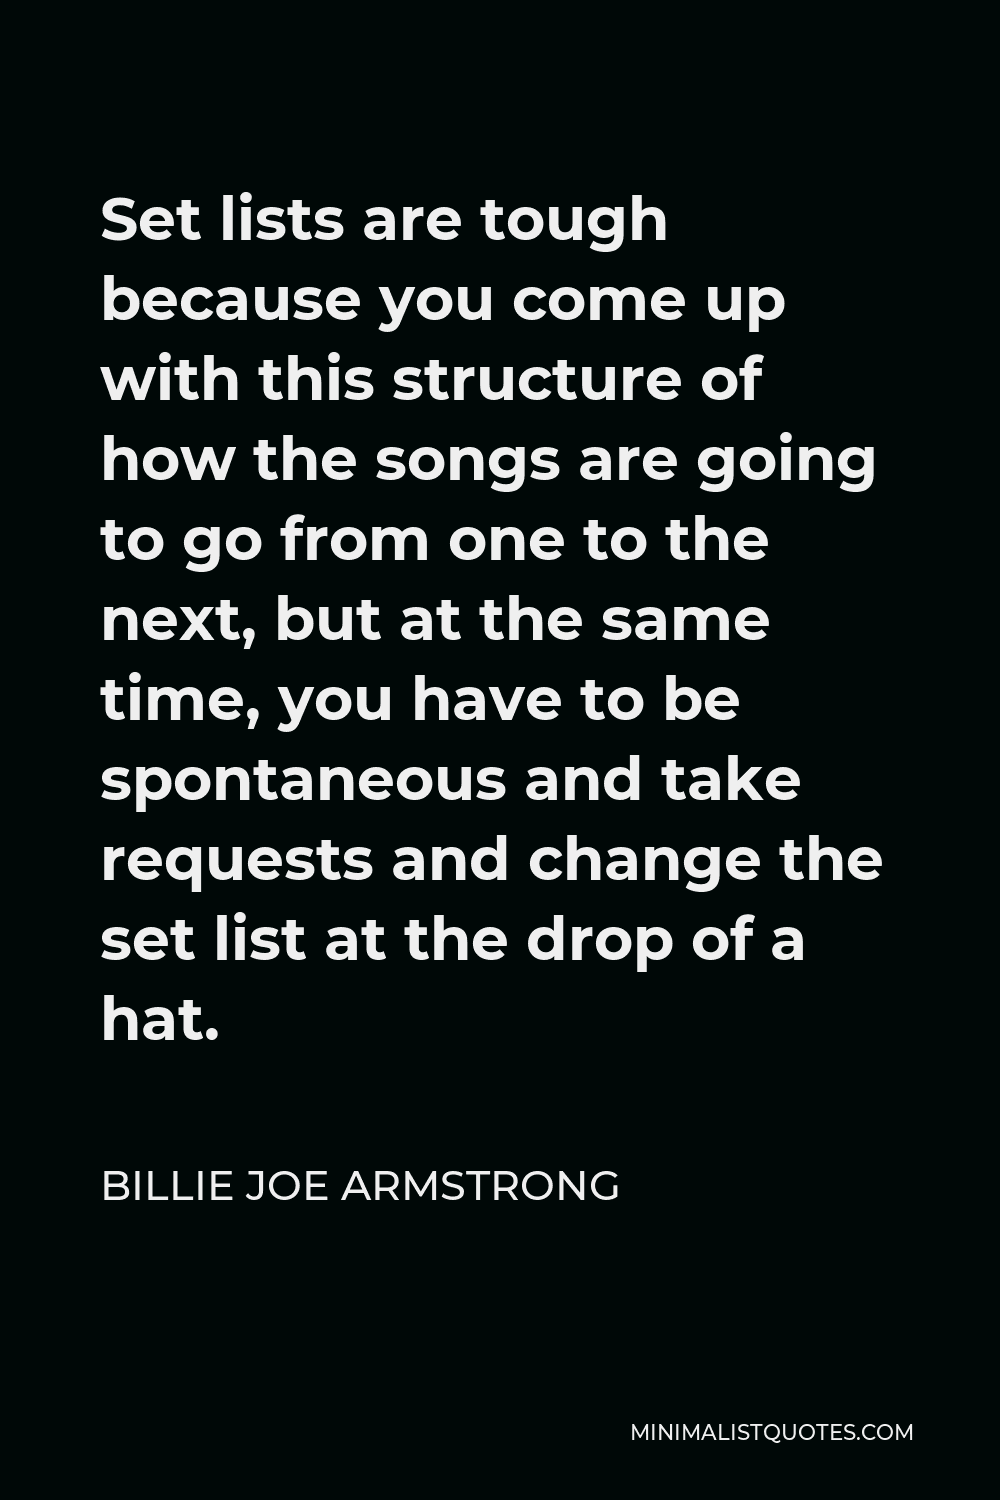 Billie Joe Armstrong Quote - Set lists are tough because you come up with this structure of how the songs are going to go from one to the next, but at the same time, you have to be spontaneous and take requests and change the set list at the drop of a hat.